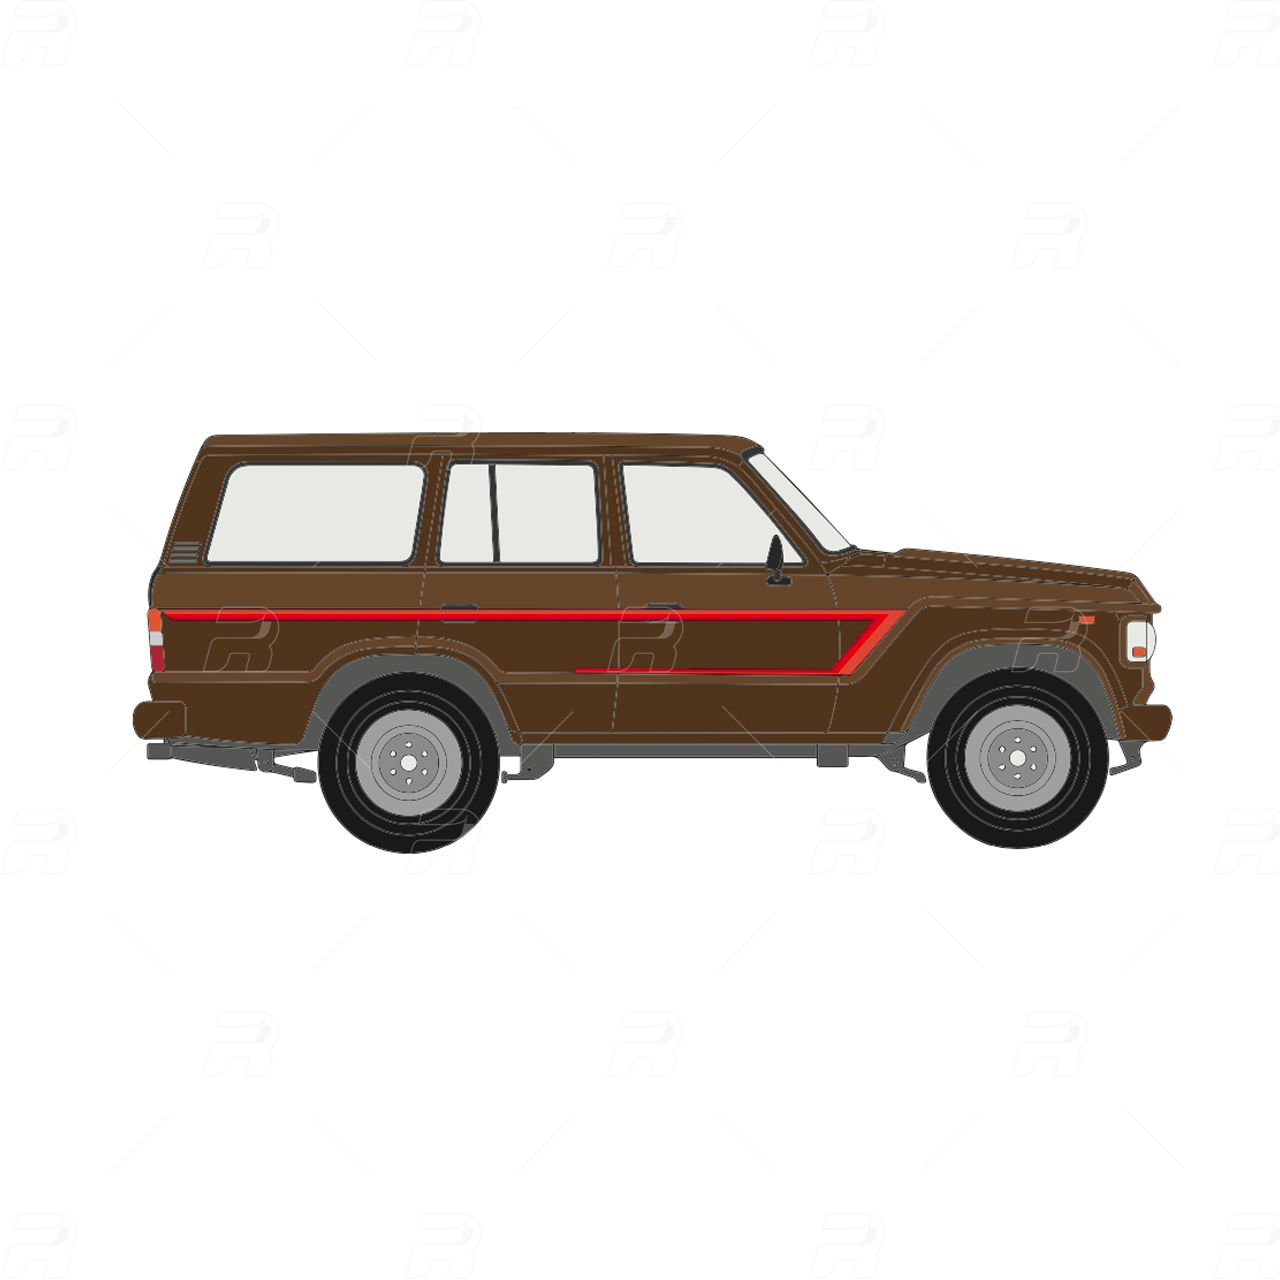 Toyota 60-Series Land Cruiser Simple Red Decal